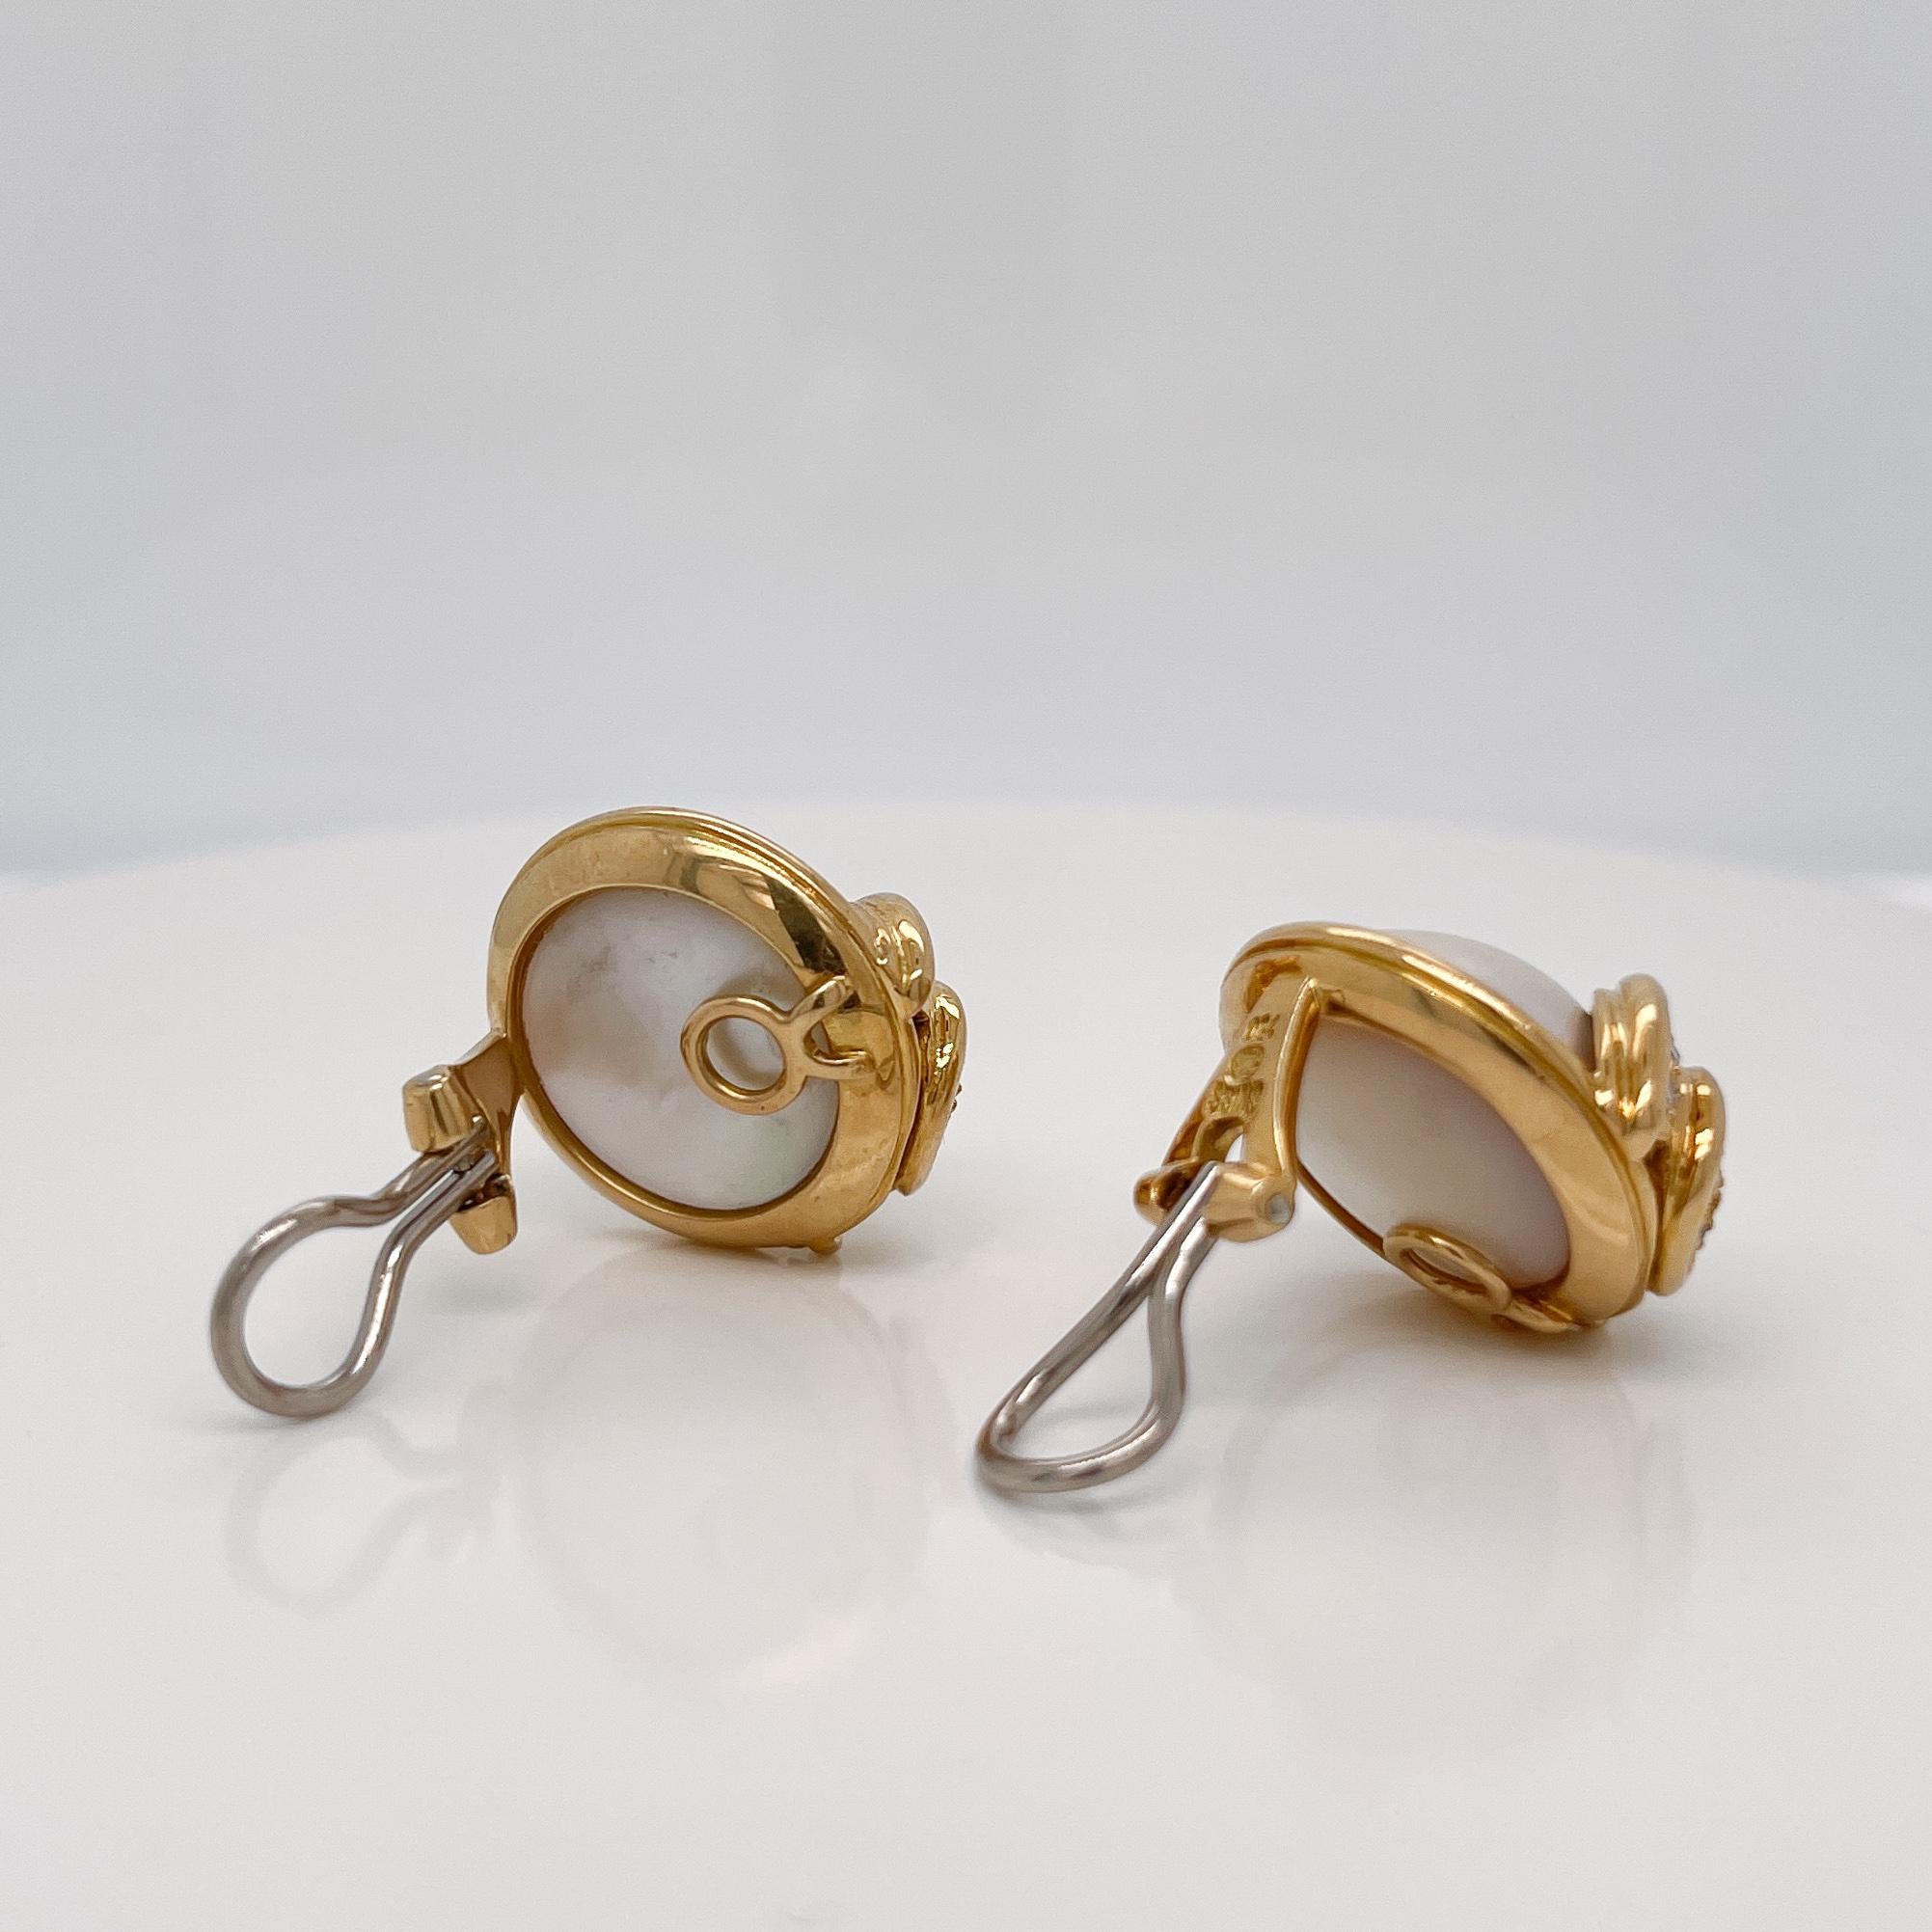 Pair of Signed Gübelin 18K Gold, Diamond & Mabe Pearl Clip-On Earrings For Sale 2